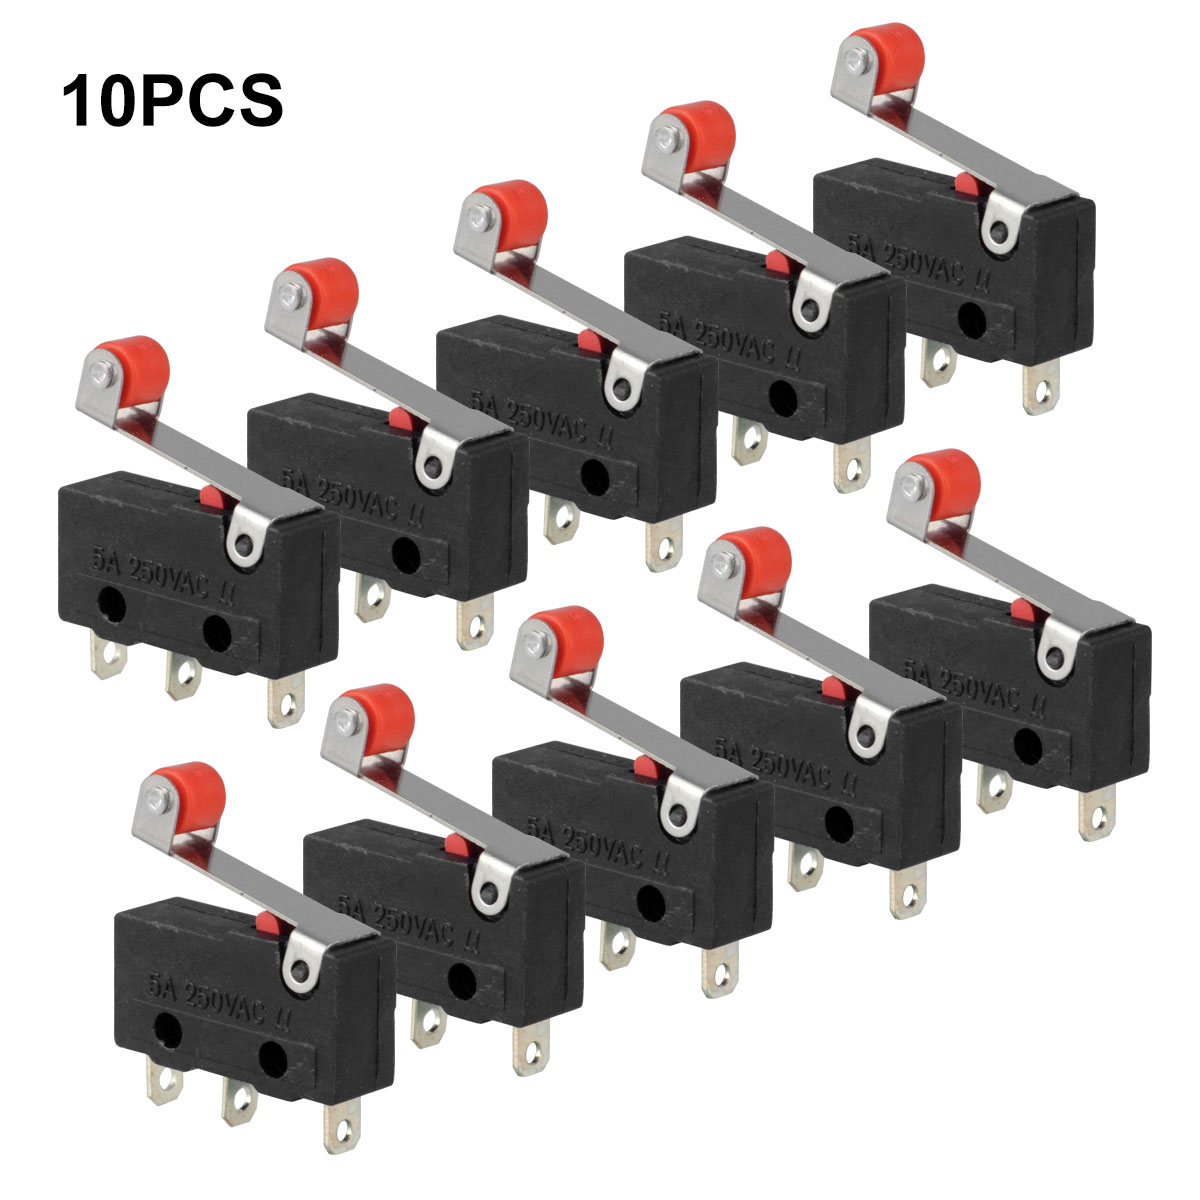 10Pcs Micro Roller Lever arm Open Close Limit Switch Kw12-3 Pcb ...